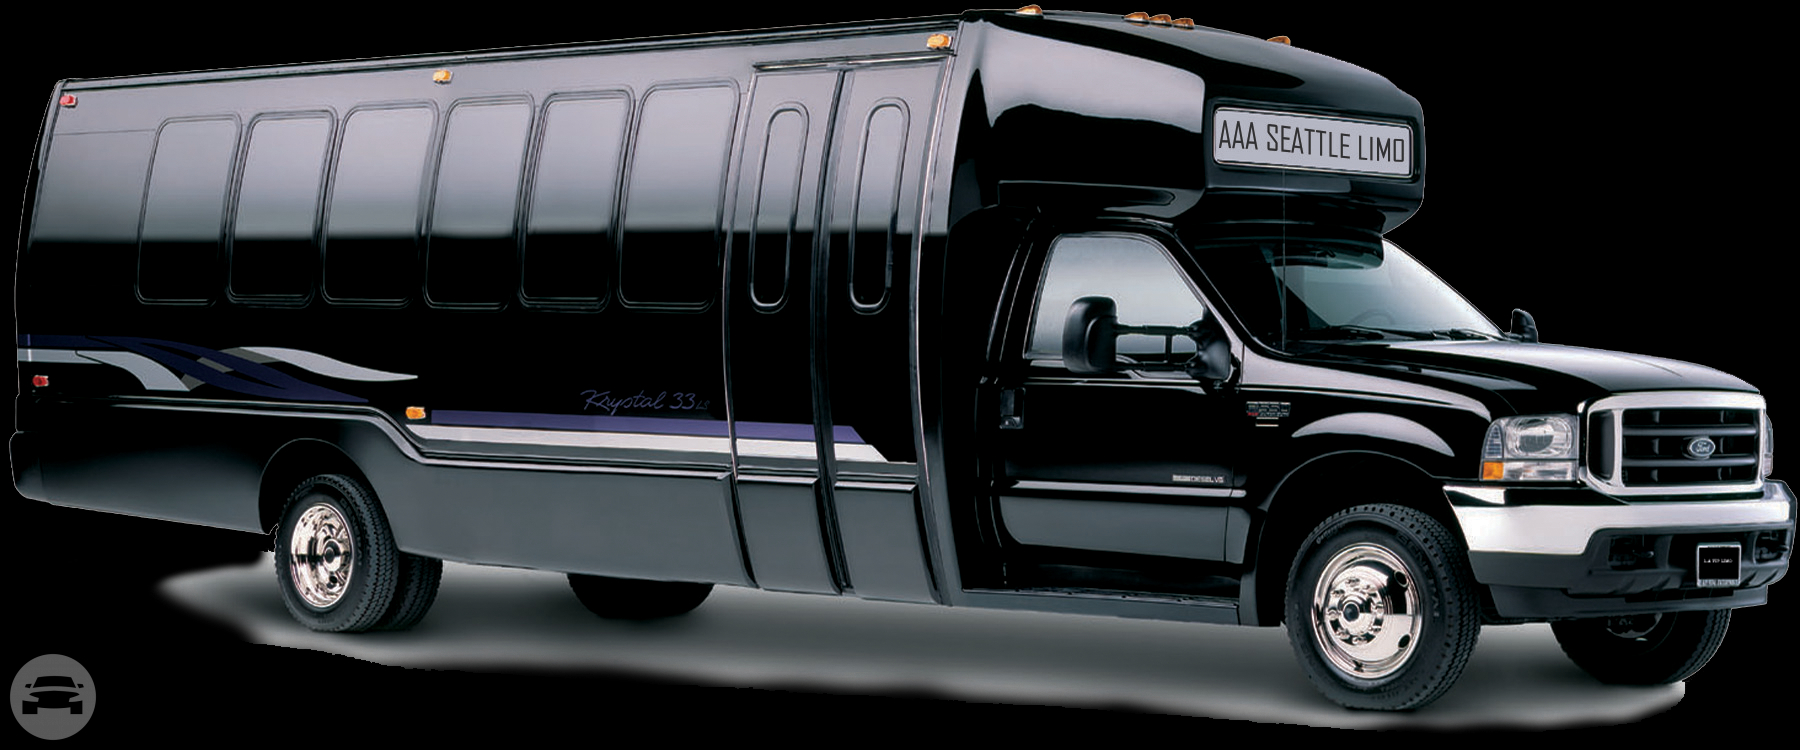 PARTY BUS
Party Limo Bus /
Seattle, WA

 / Hourly $0.00
